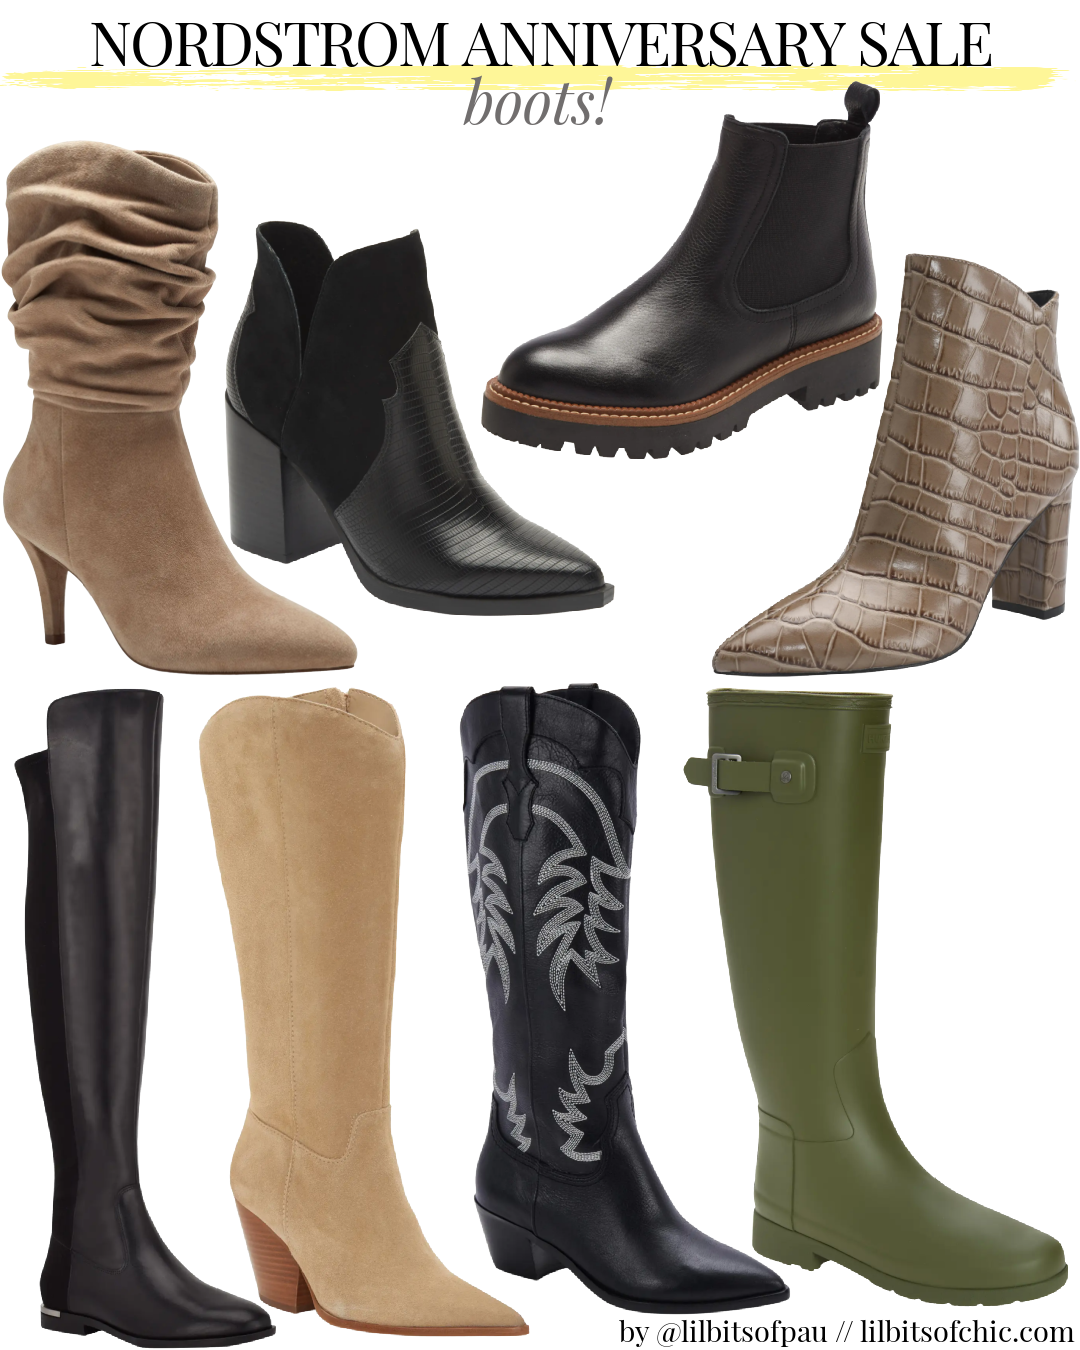 Nordstrom Anniversary Sale 2022 boots and booties, nsale22 boots